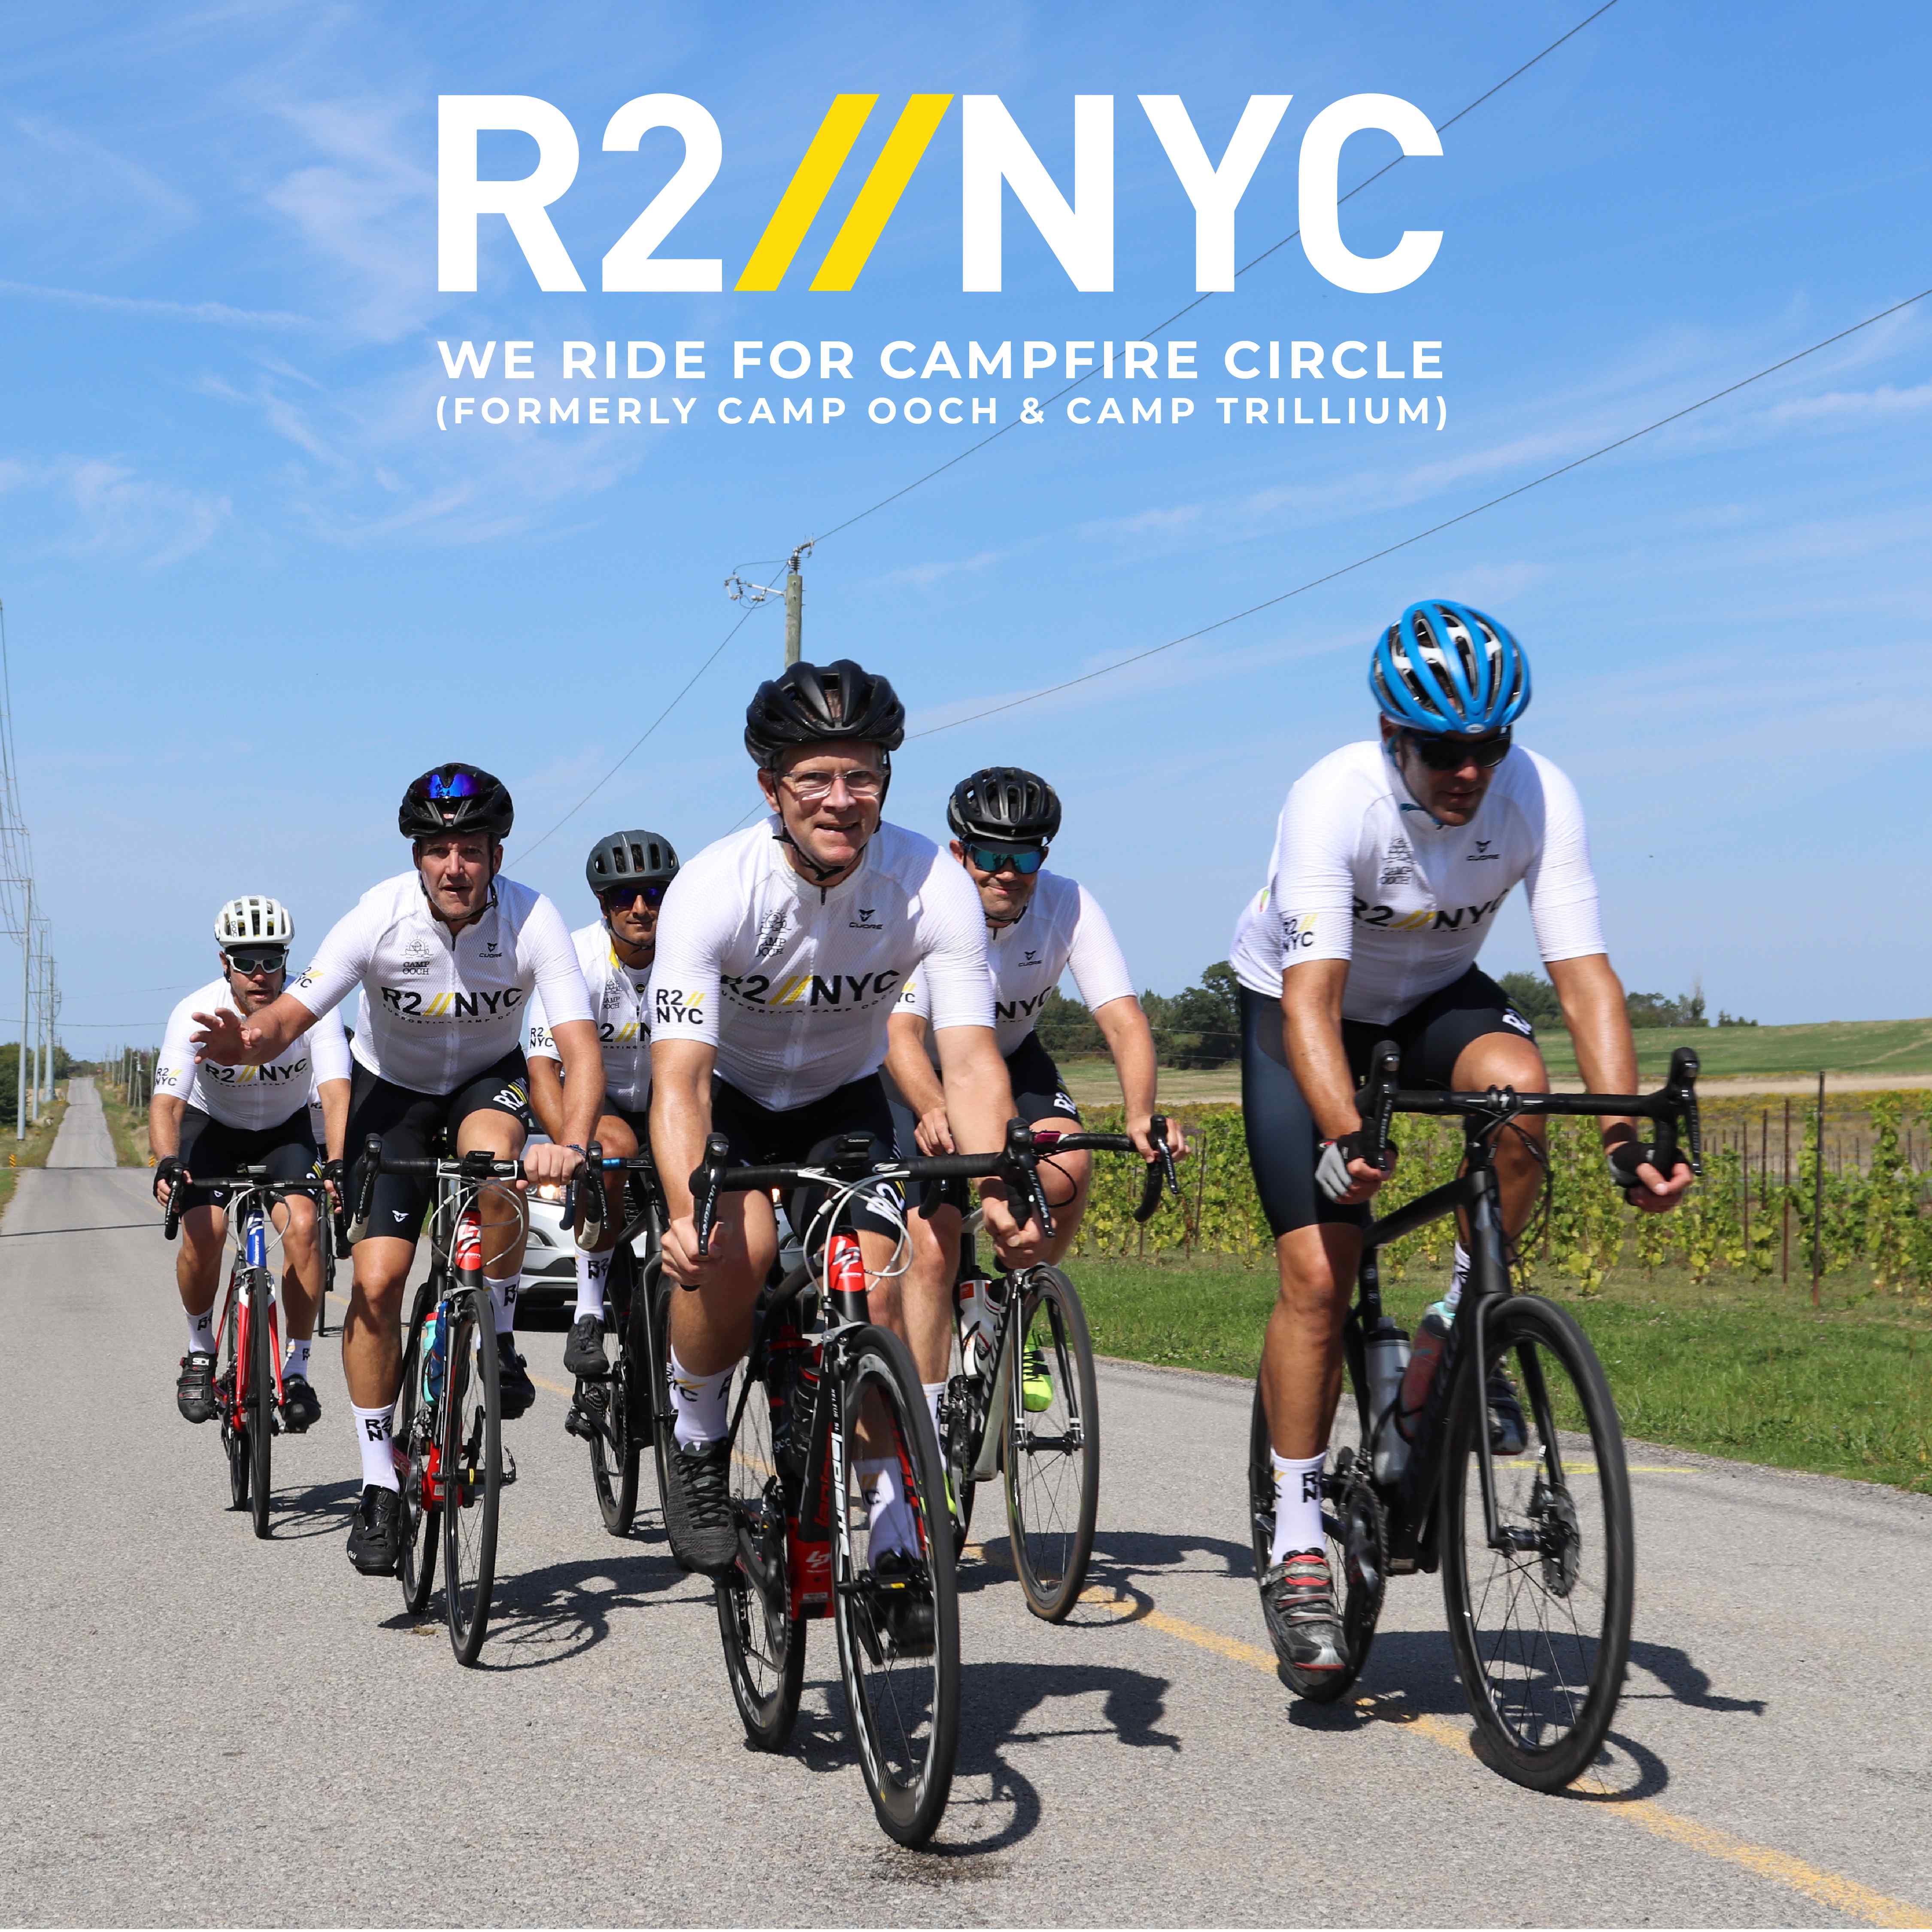 R2NYC We ride for Campfire Circle (Formerly Camp Ooch & Camp Trillium) Six riders biking on road surrounded by blue sky